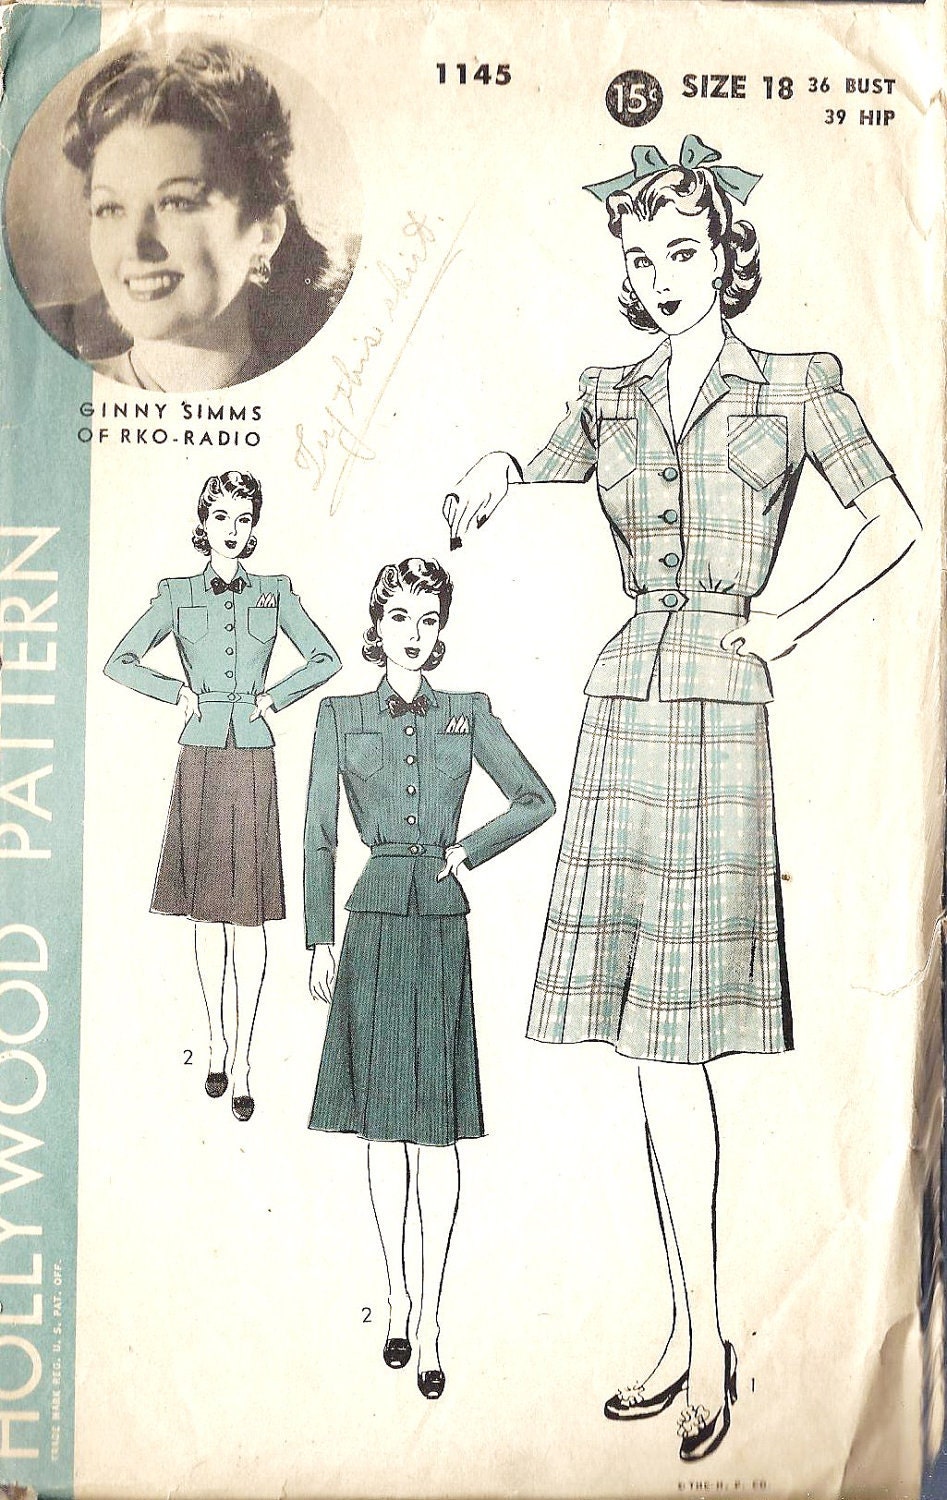 1940s Misses Dress with Skirt and Peplum Jacket Vintage Sewing Pattern, Hollywood 1445 Bust 36" - MissBettysAttic